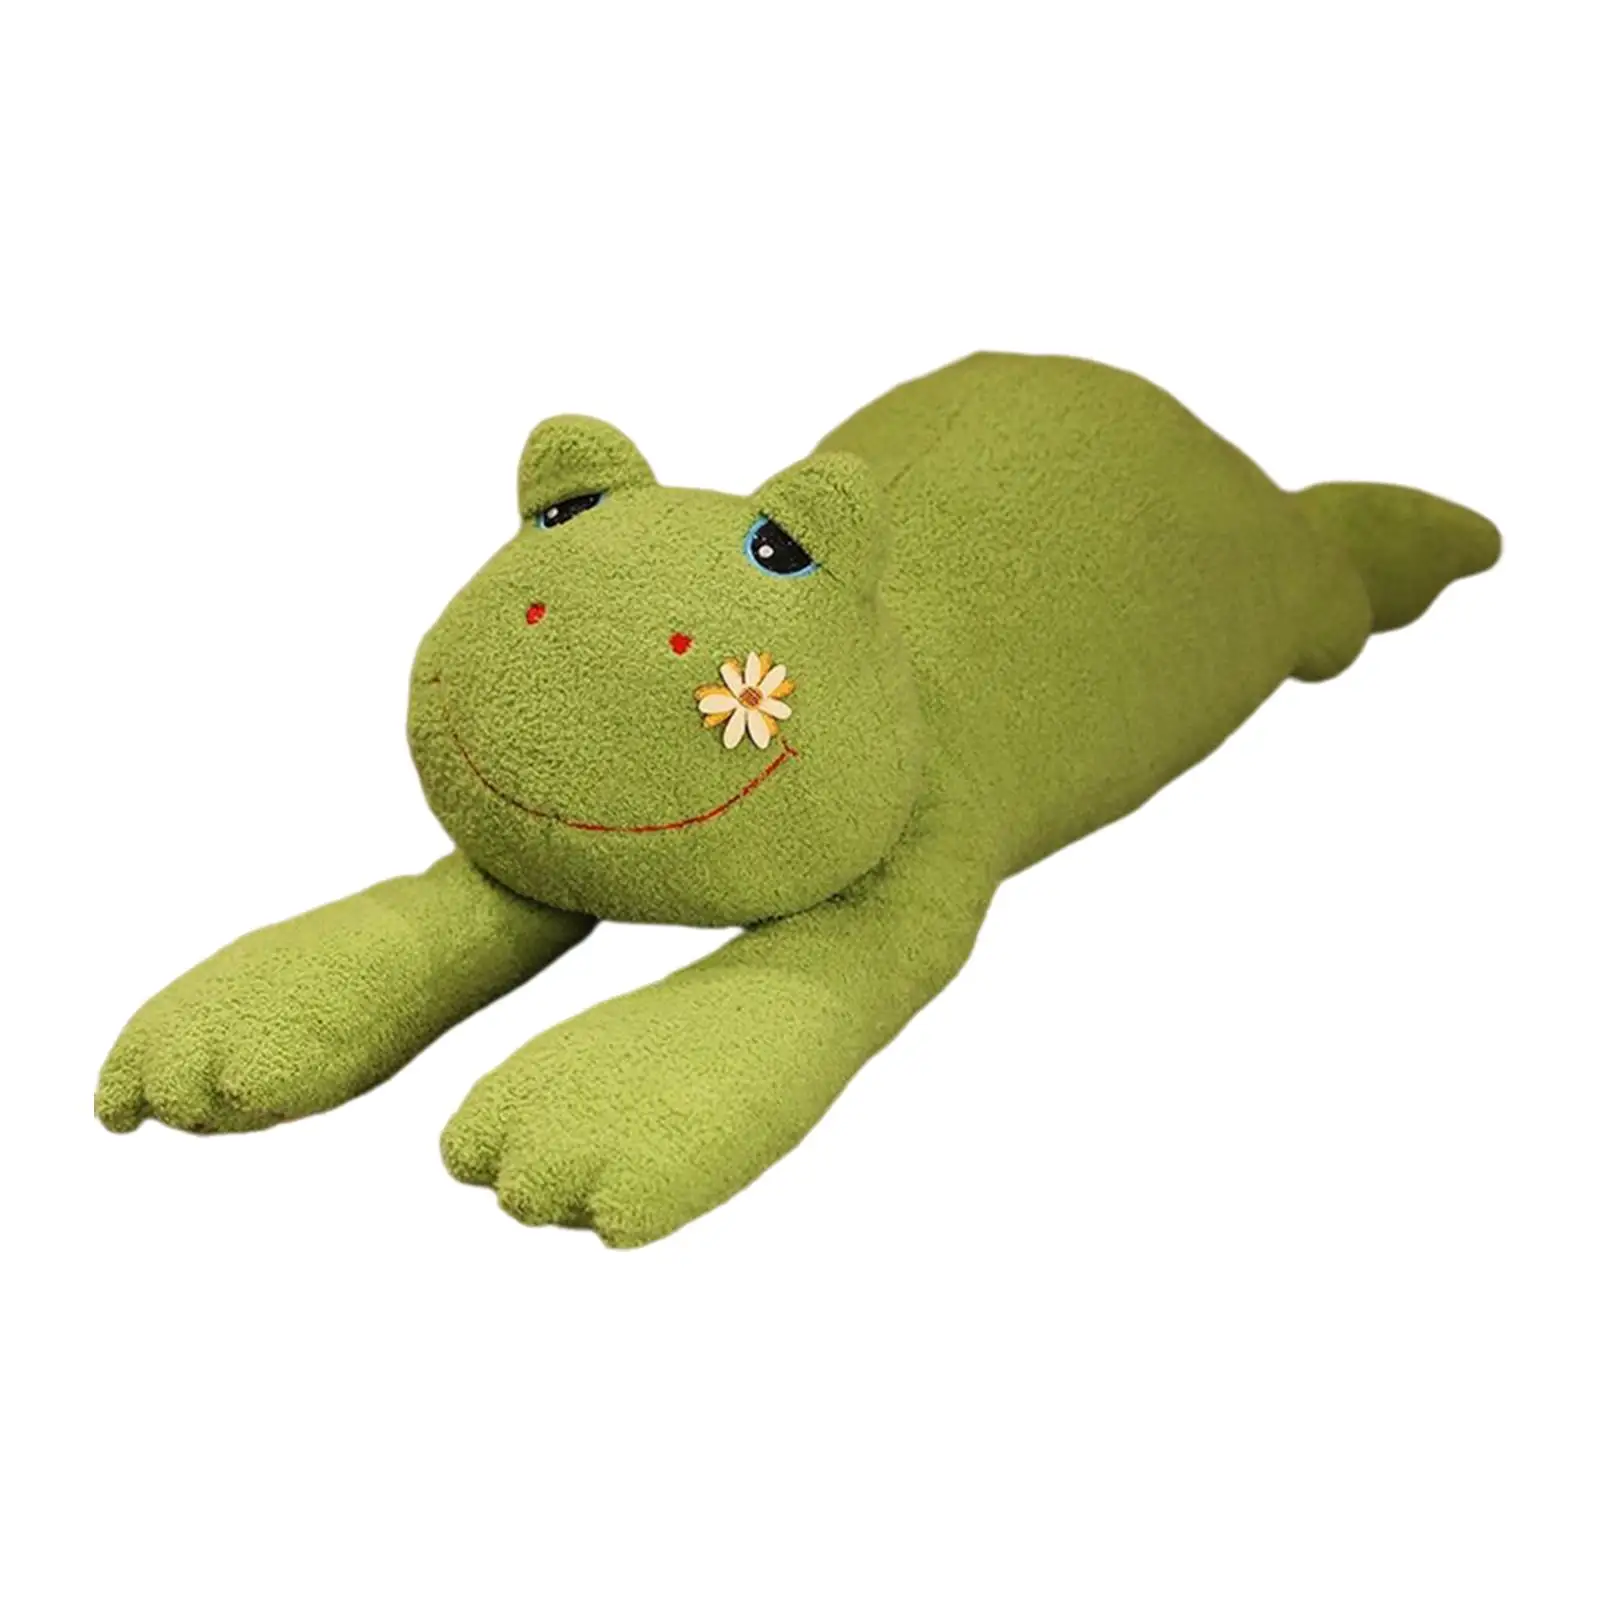 Soft Frog Plush Doll Home Decoration ,Frog pillow ,Cute Stuffed Animal for Holiday